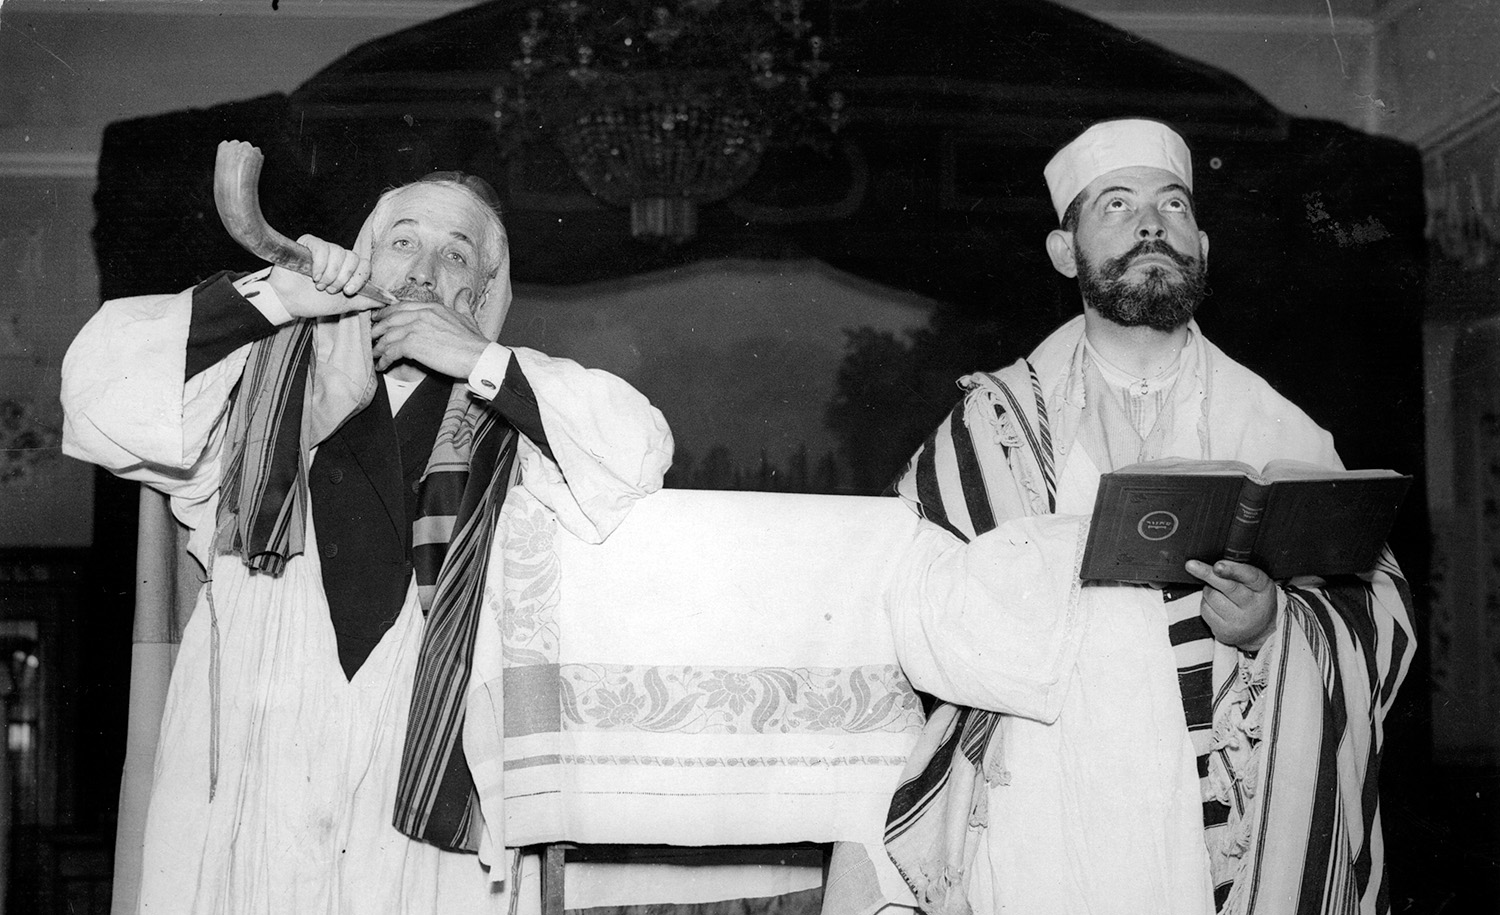 A rabbi with his shofar on Yom Kippur on September 23th, 1930. Imagno/Getty Images.
